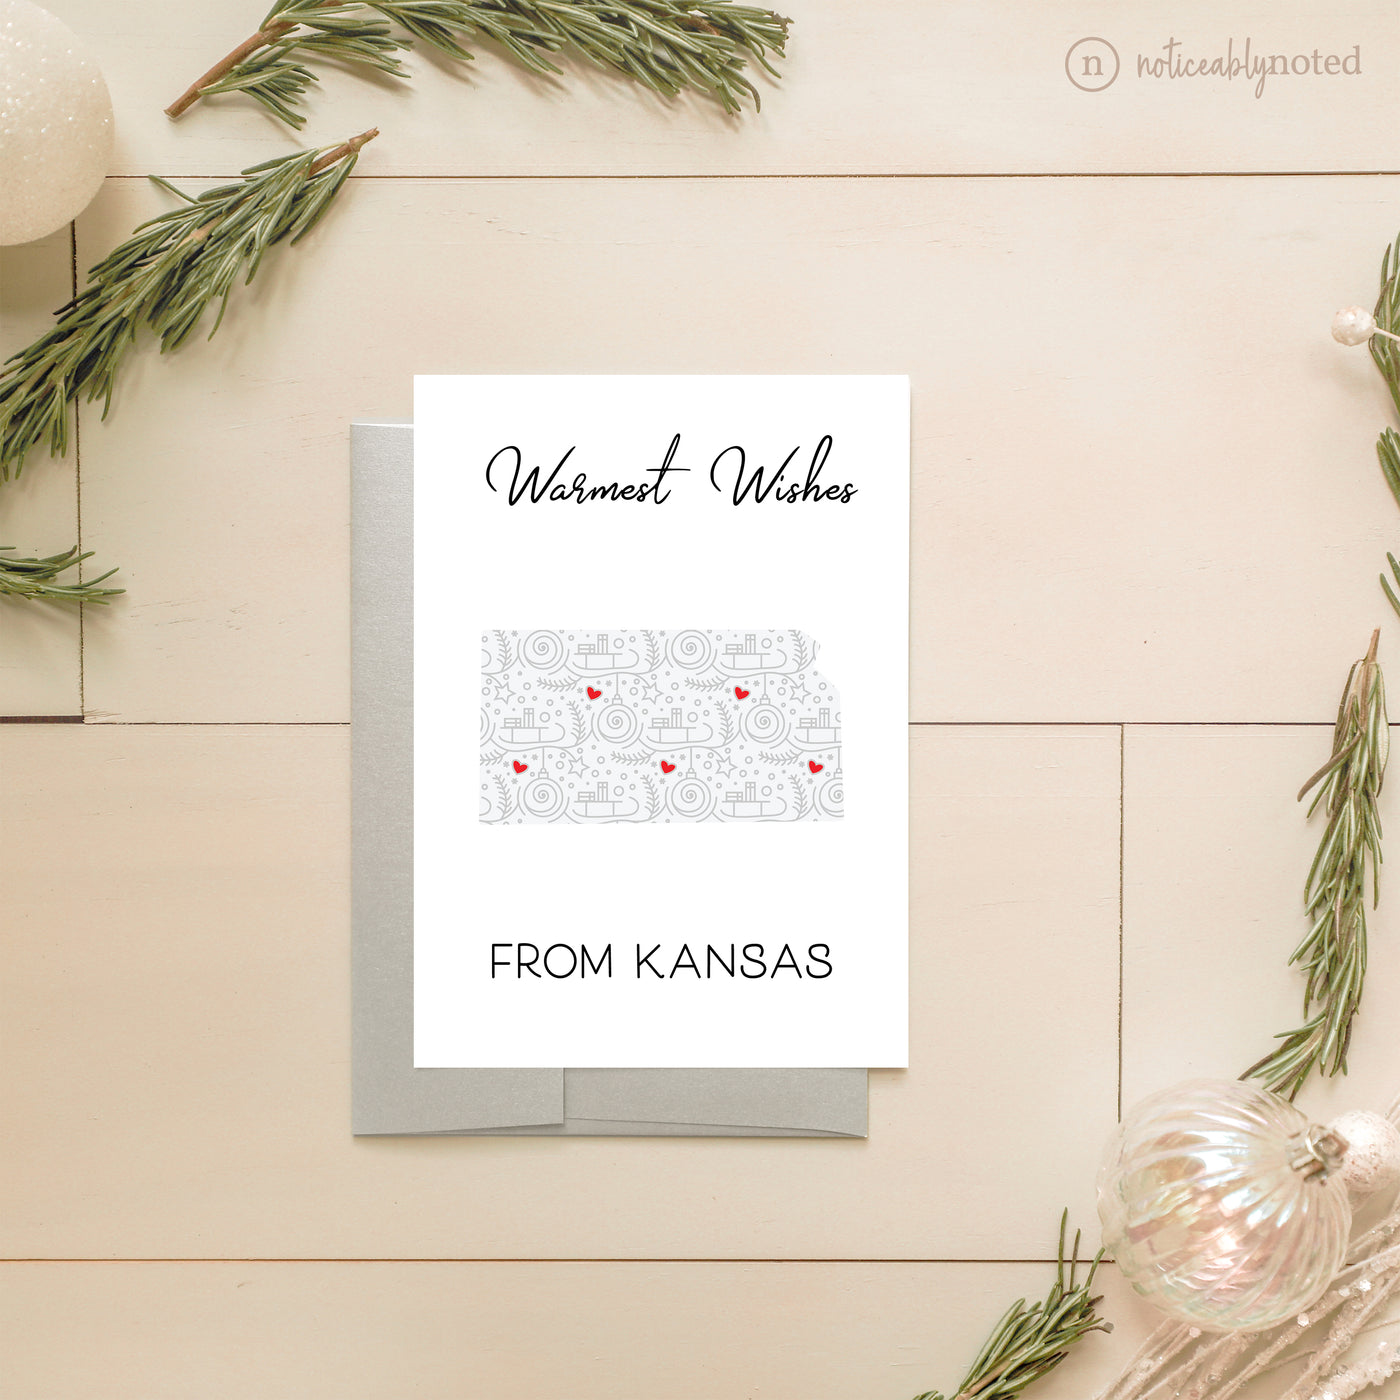 KS Holiday Greeting Cards | Noticeably Noted